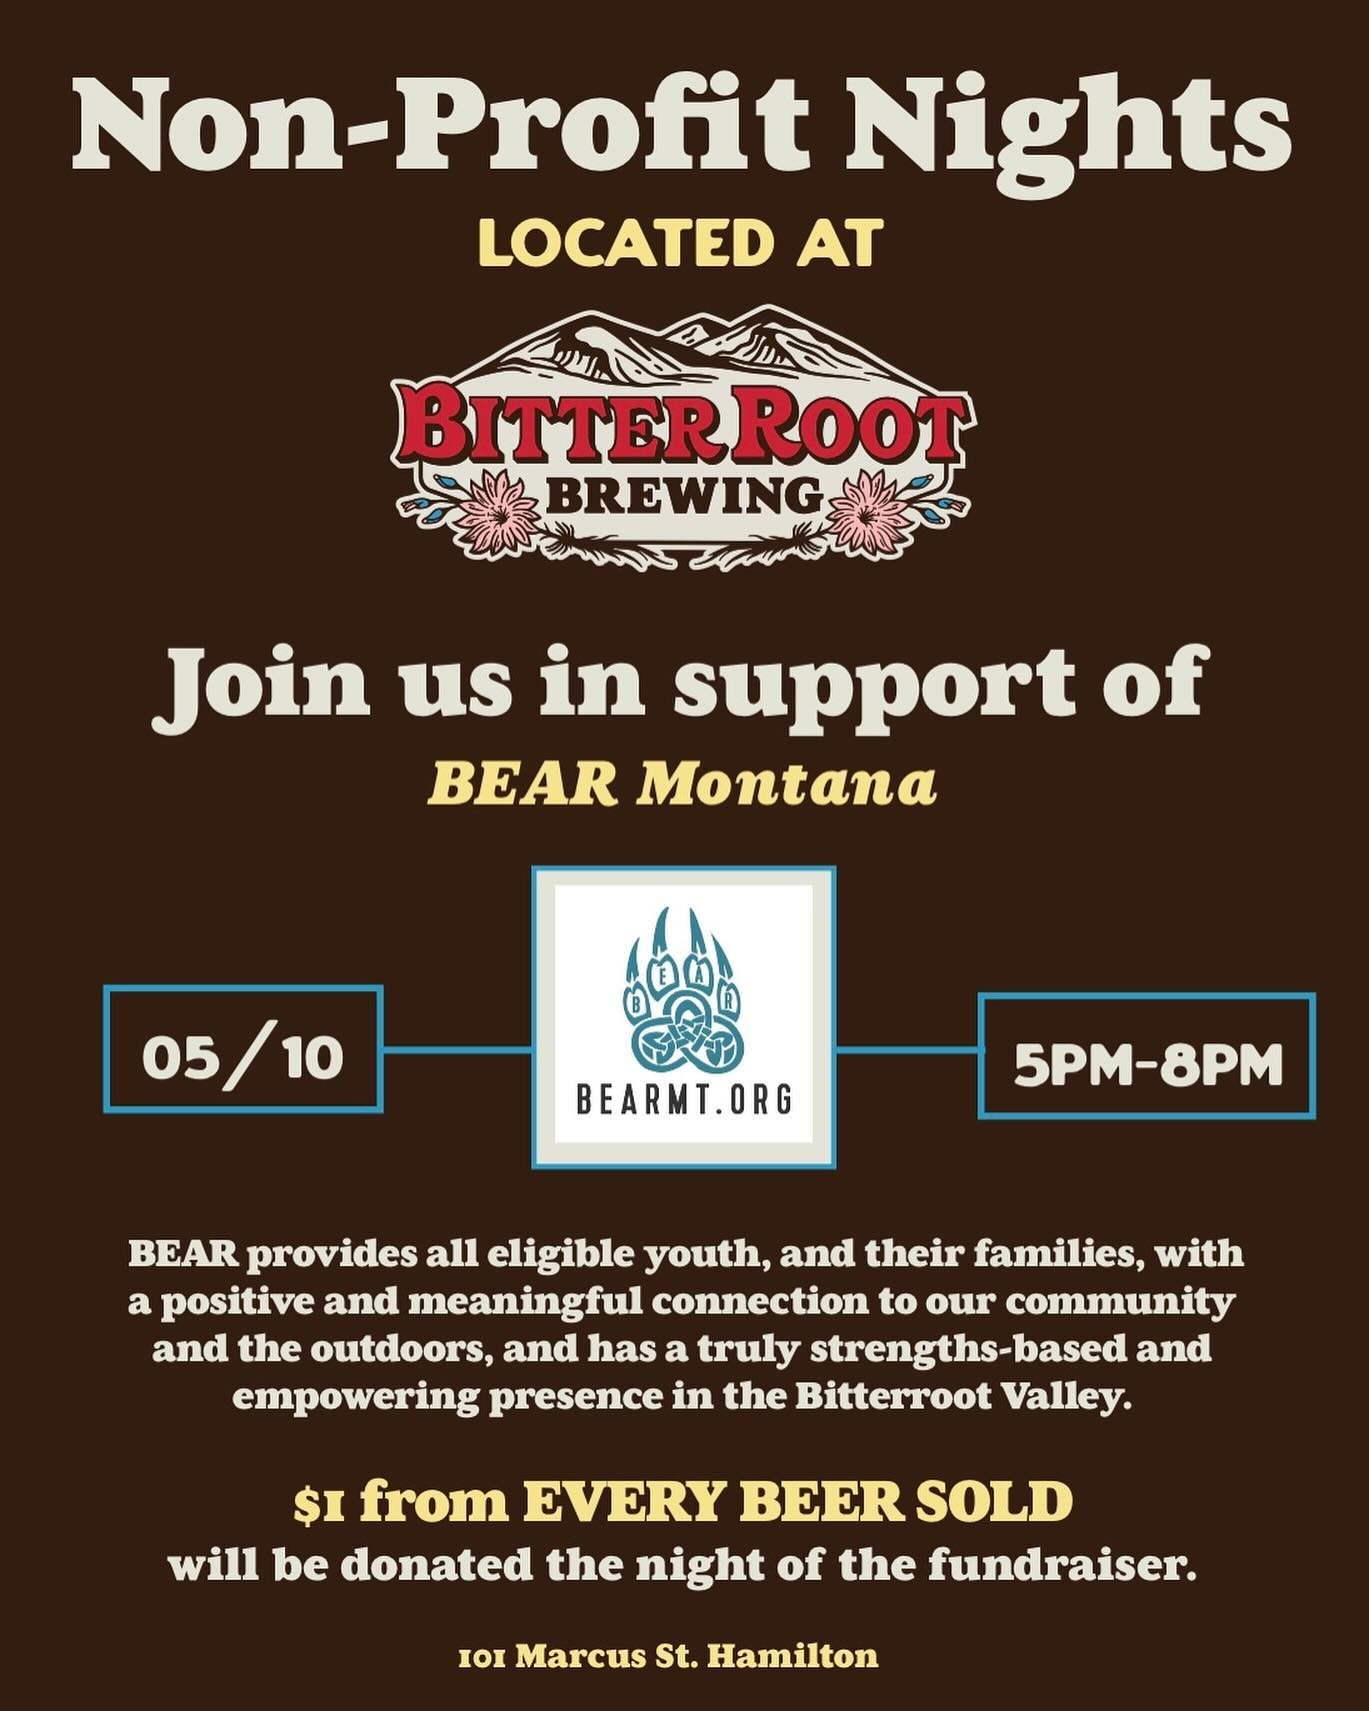 Come down and help us support BEAR Montana this evening. $1 from every beer sold from 5-8pm goes to support them. 
.
.
.
#nonprofitnight #supportlocal #getoutside #montanacraftbeer #drinklocalbeer #hamtownsfinest